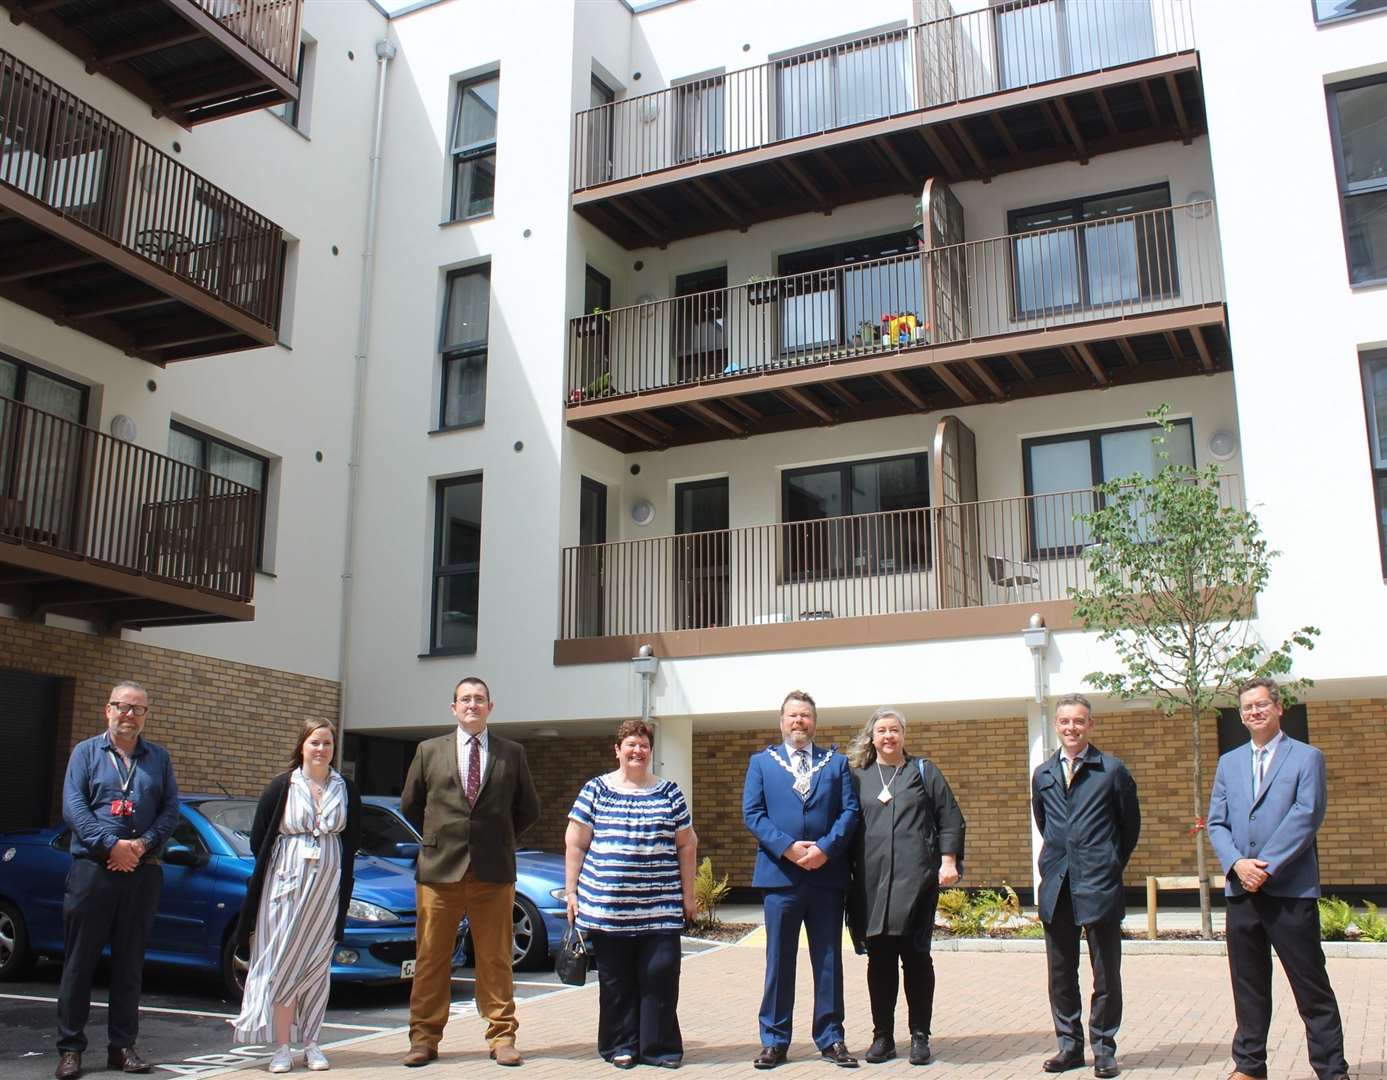 Mayor of Ashford Cllr Callum Knowles joins Cllr Bill Barrett (far right), Sharon Williams (fourth left) and other officers outside the town centre development